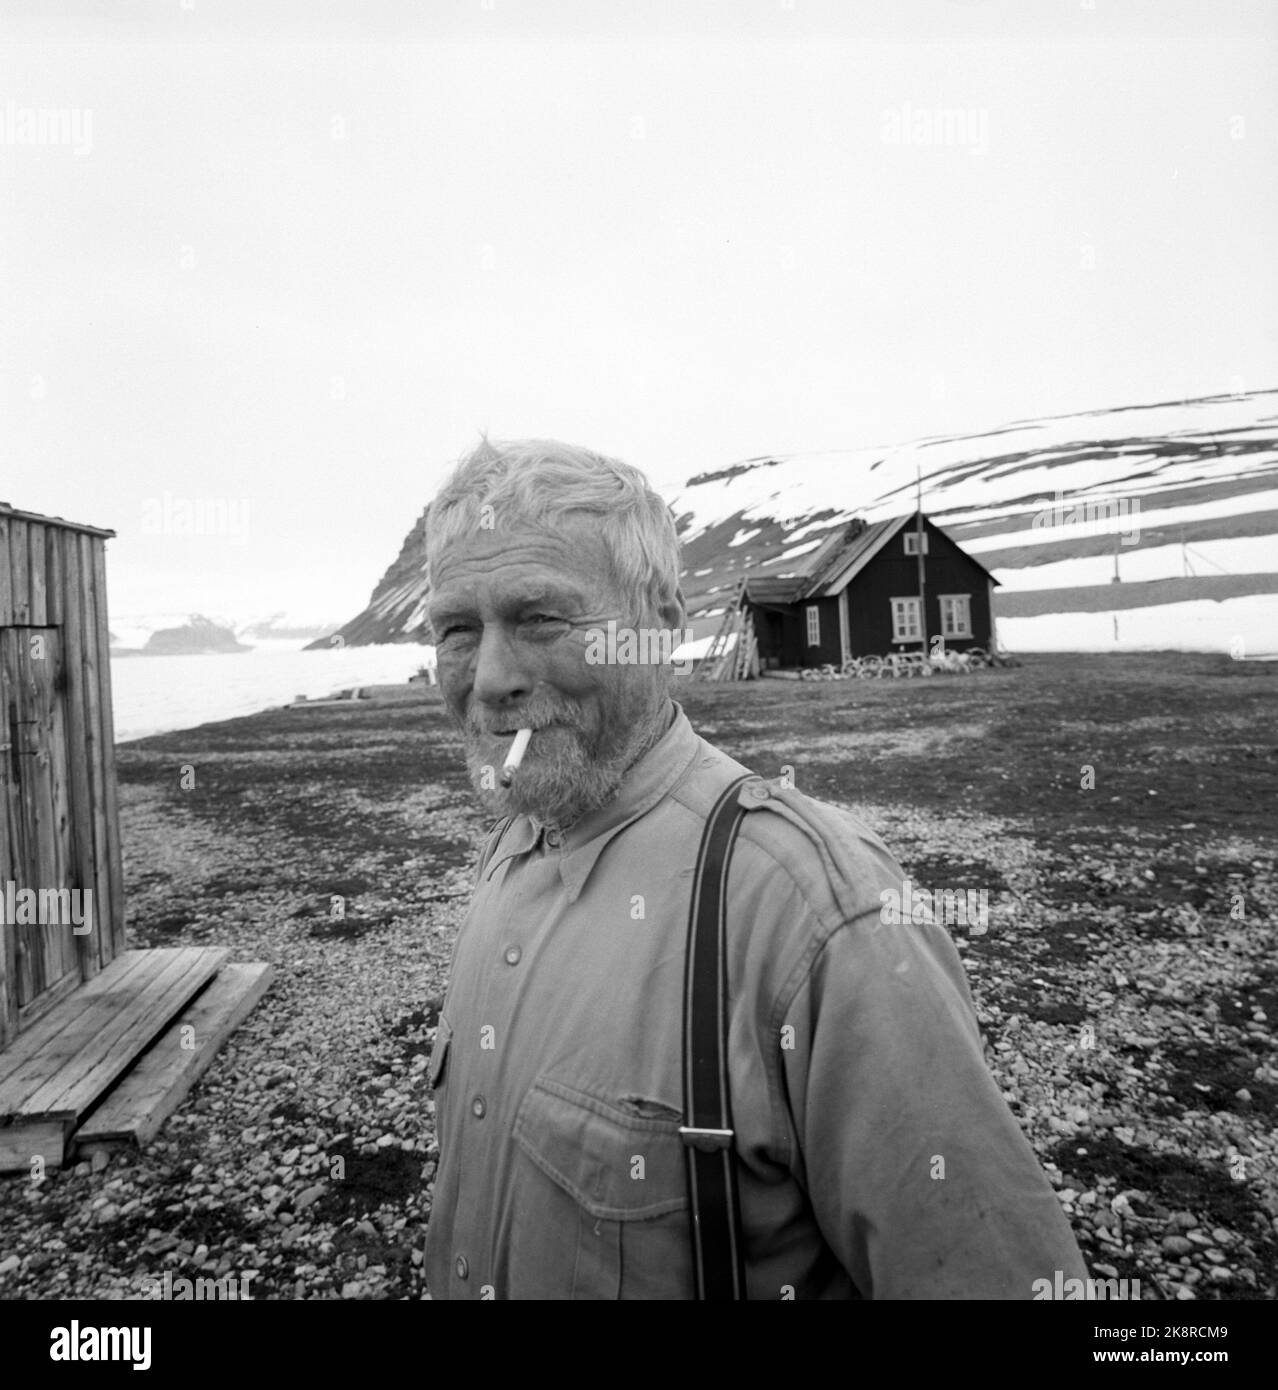 Svalbard, Sassen, 1963. Hilmar Nøis (72) is an adventurer, trapper and hunter. He has been wintering at Svalbard for many years, since he came here for the first time in 1909. Lately he has had his wife Helfrid with him, they were devoted by the Governor in 1937. Here outside the cabin Photo: Aage Storløkken / Current / NTB Stock Photo